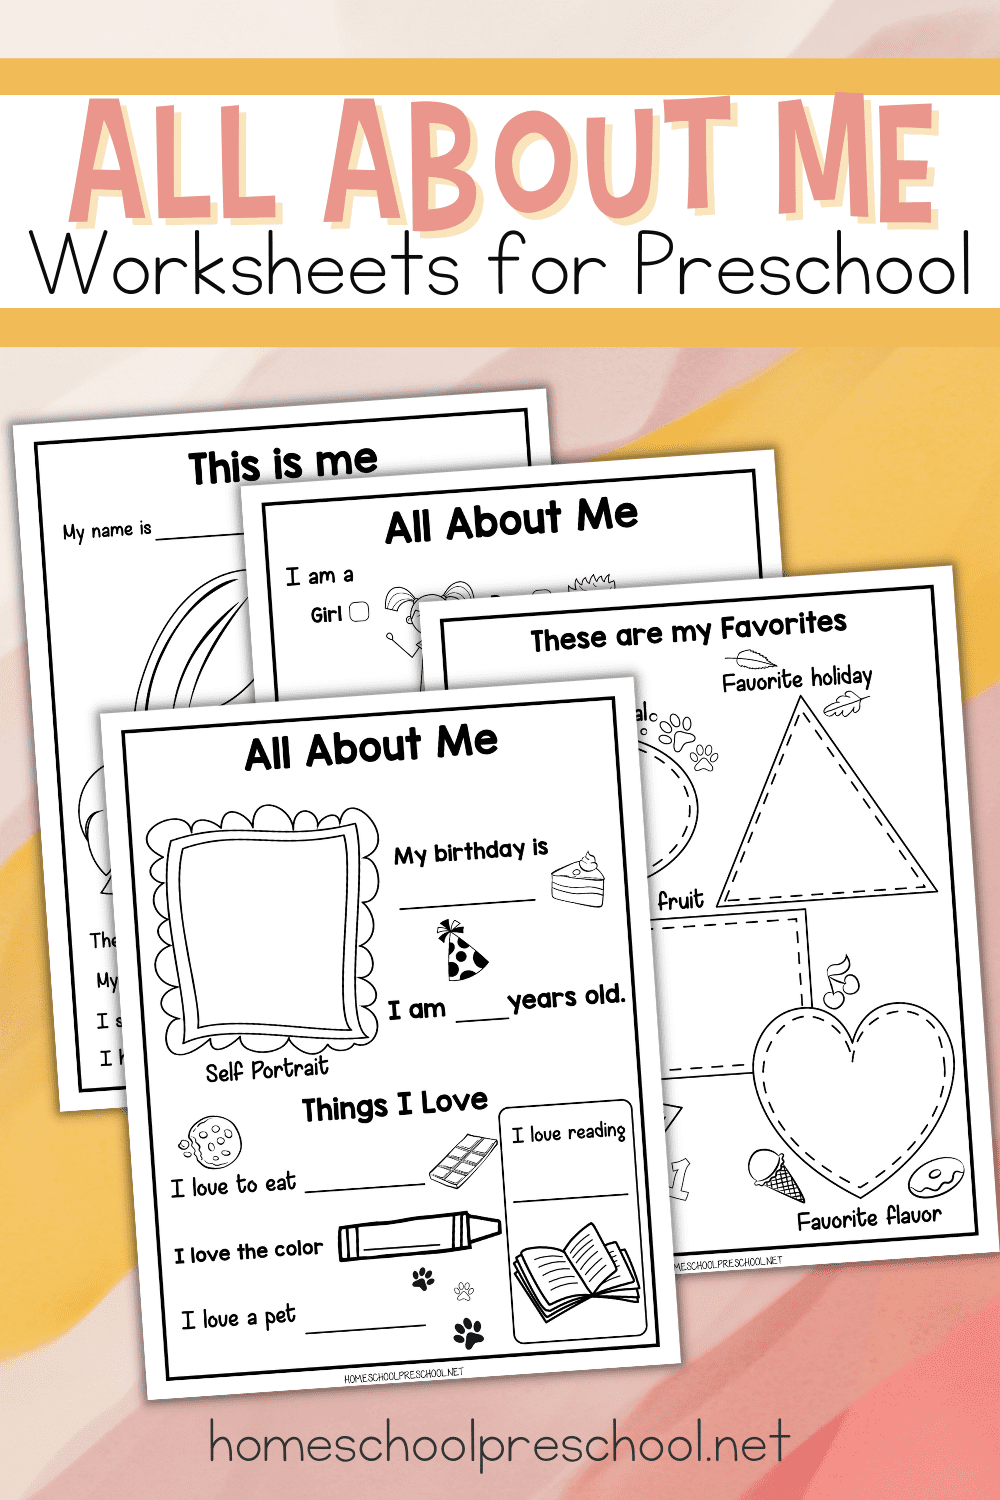 all-about-me2 All About Me Preschool Worksheets